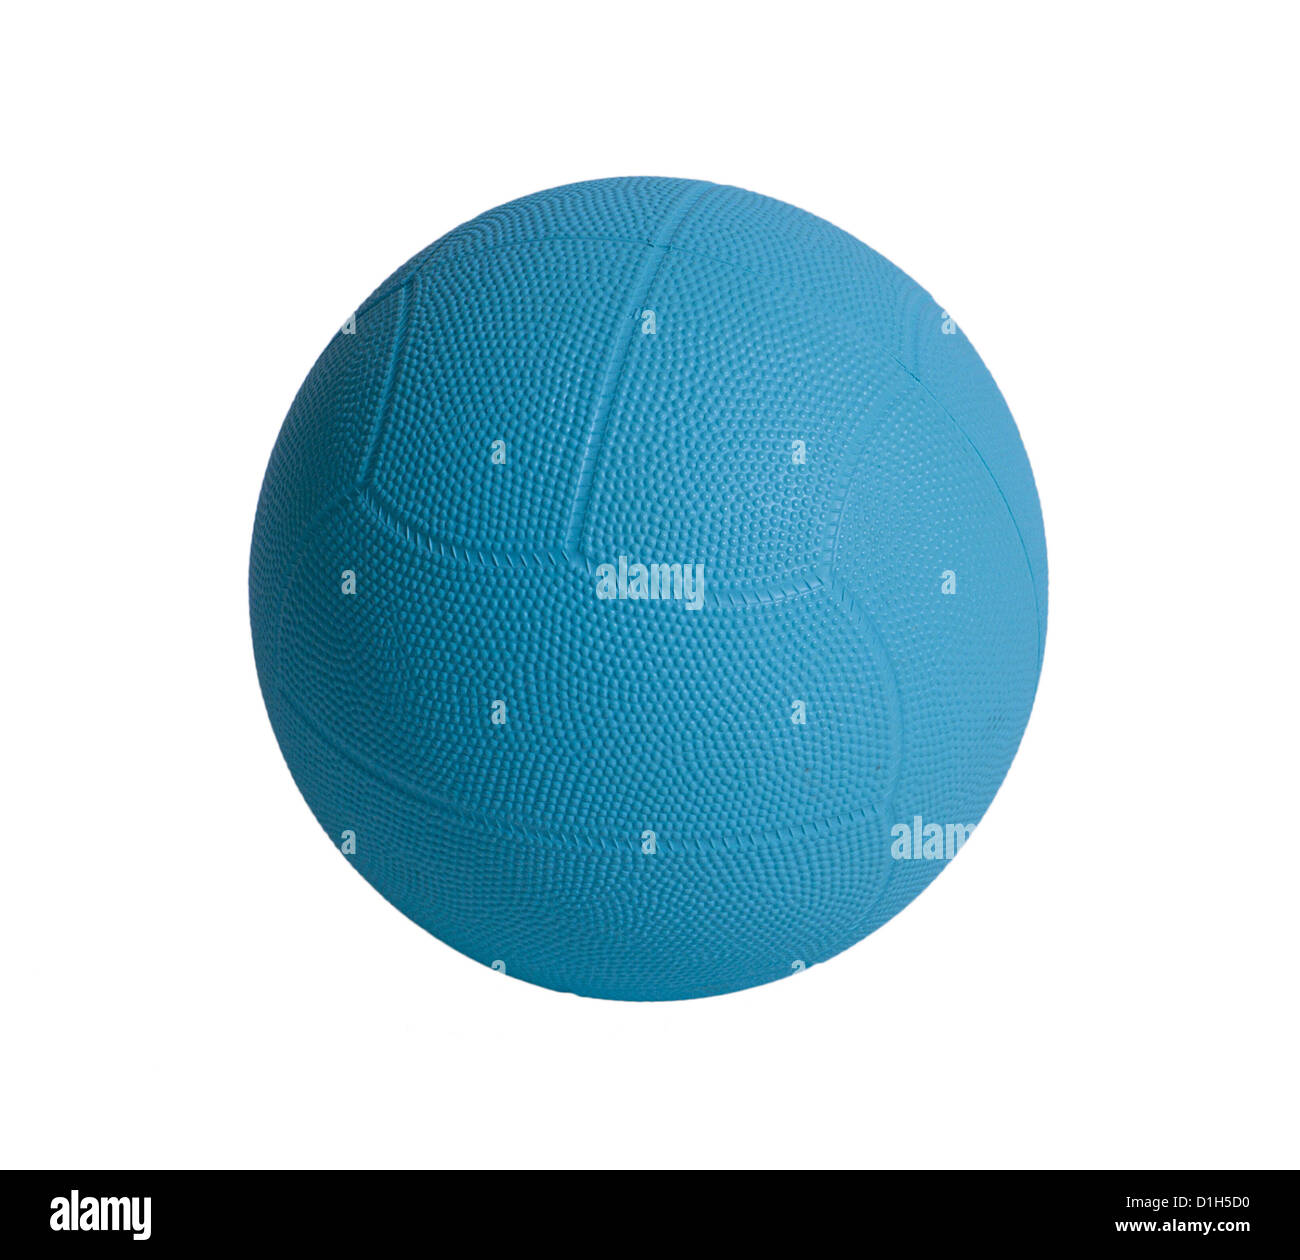 Blue dodge ball a sporting goods isolated Stock Photo